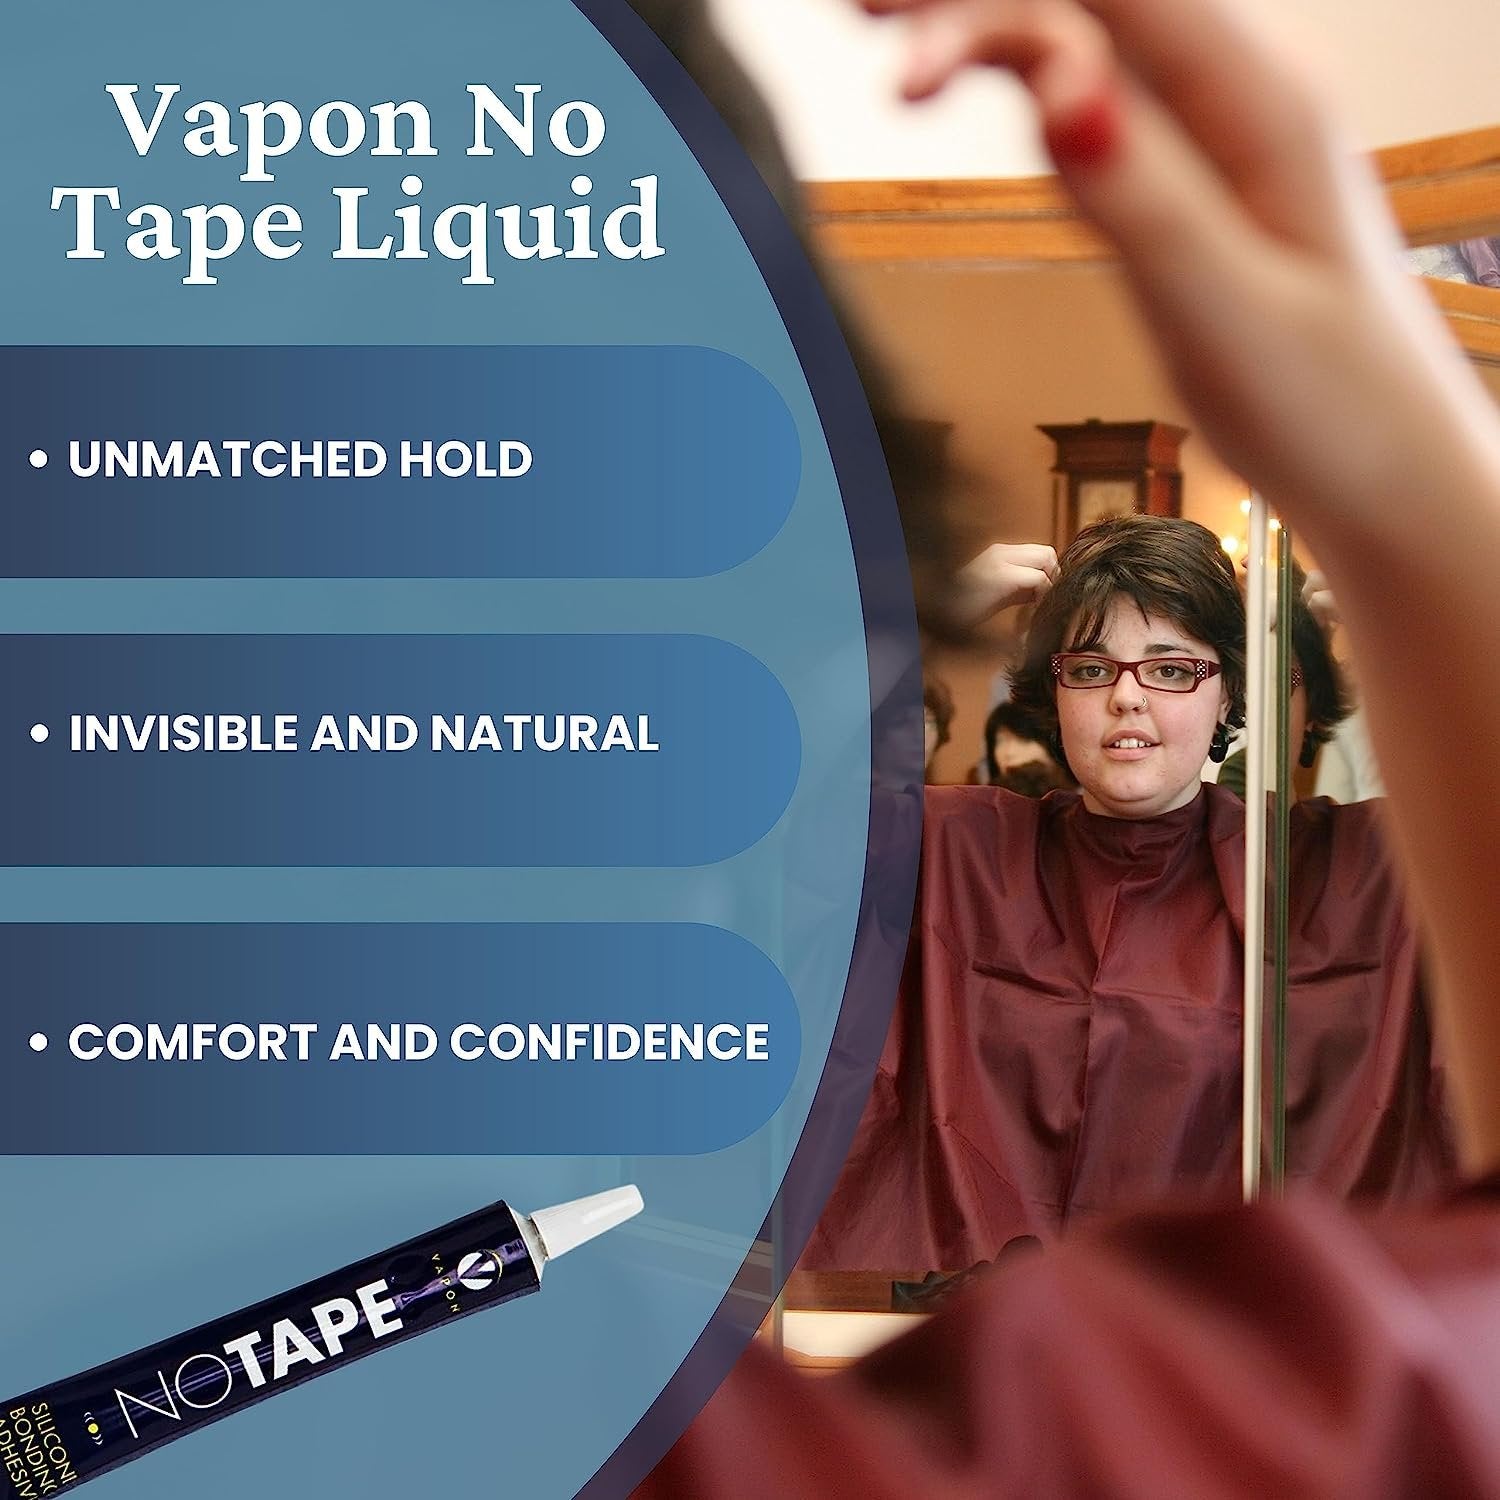 Vapon No Tape Liquid Hair Glue Adhesive - Waterproof, Very Strong Hold, Ideal Bold Hold Lace Glue - 1.0oz with Bonus Worldwide Nutrition Multi-Purpose Key Chain